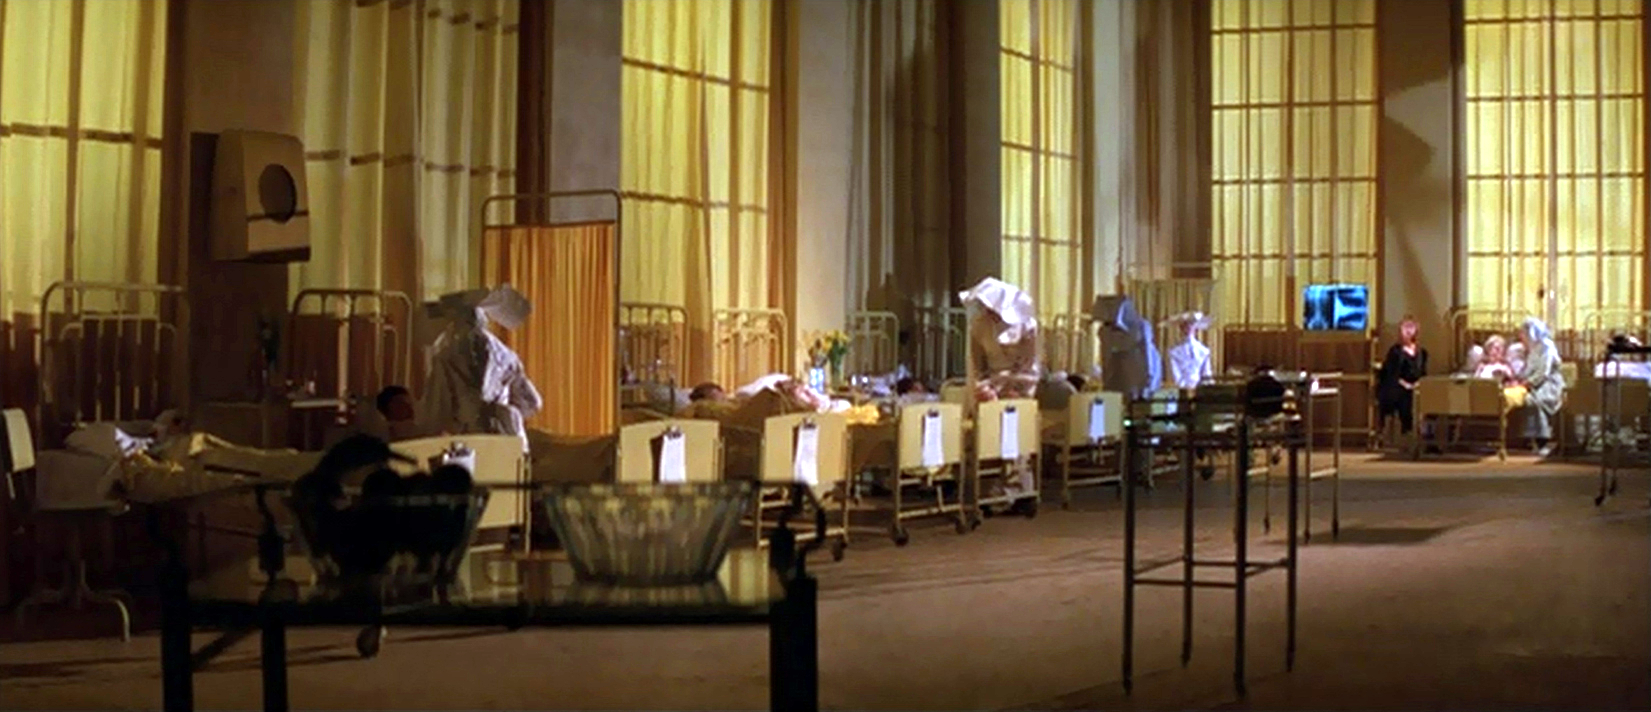 The Cook the Thief His Wife and Her Lover - Peter Greenaway - hospital - nuns